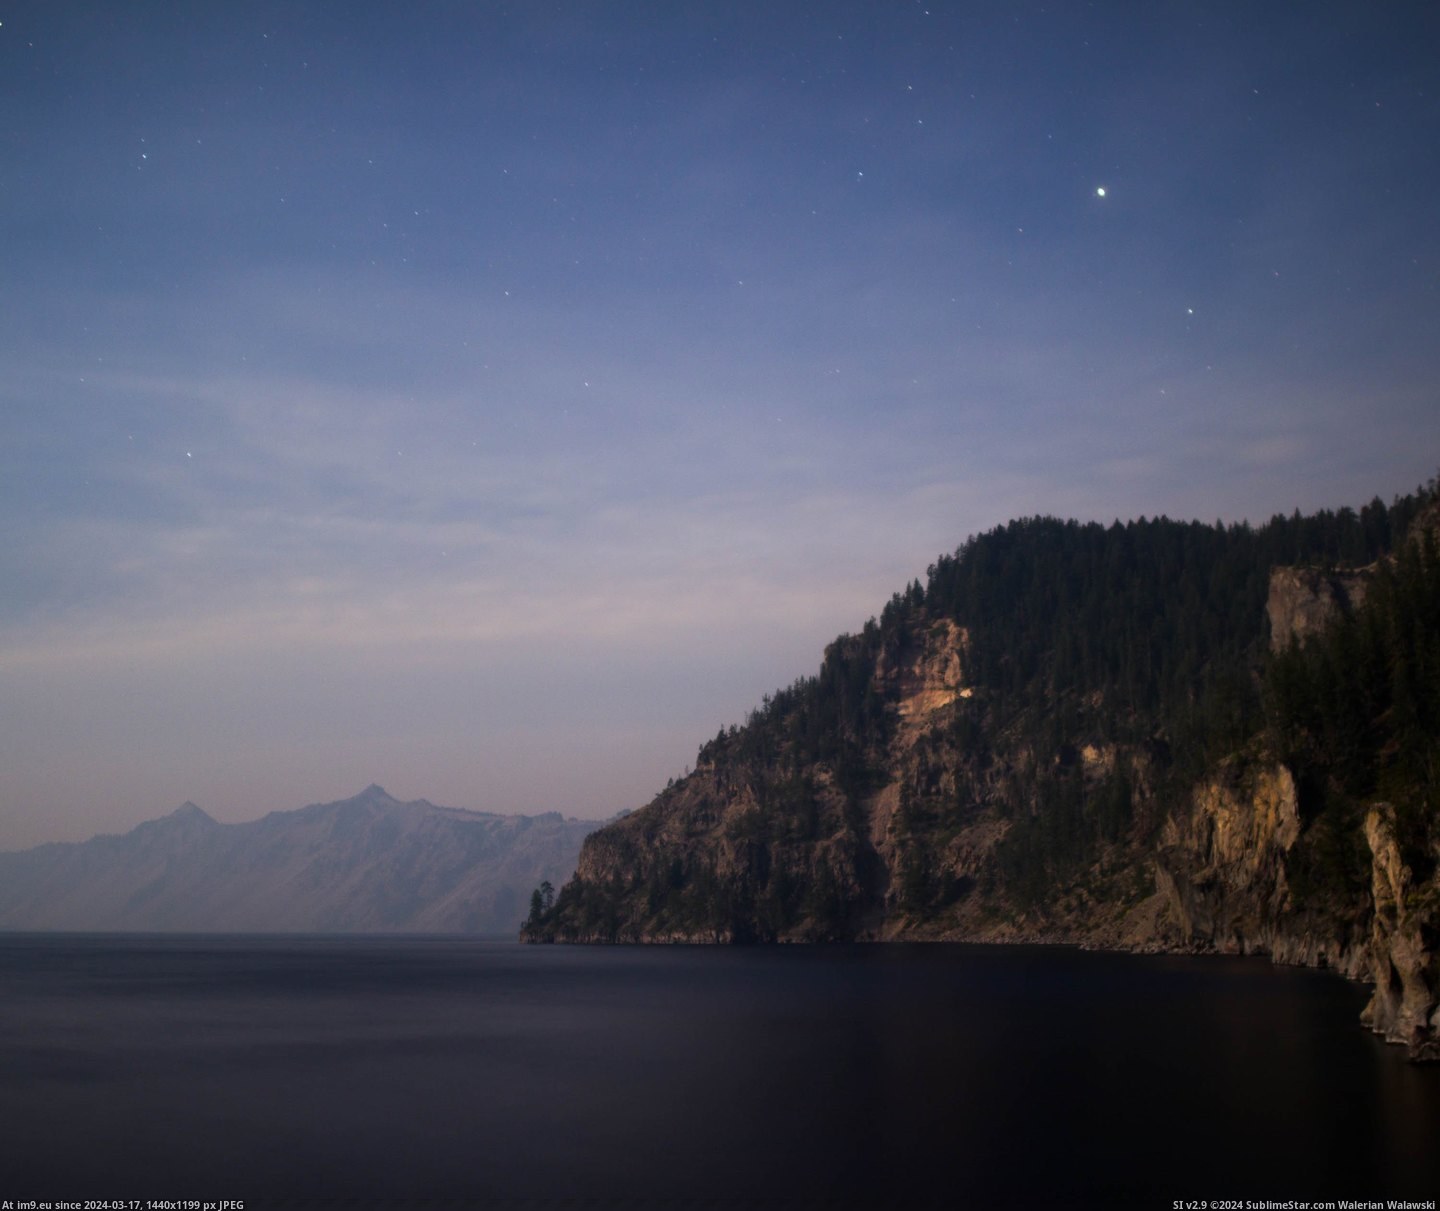 #Night #Lake #Smokey #Crater #Rim [Earthporn] Inside the rim of Crater Lake on a smokey night [3000x2510] Pic. (Image of album My r/EARTHPORN favs))